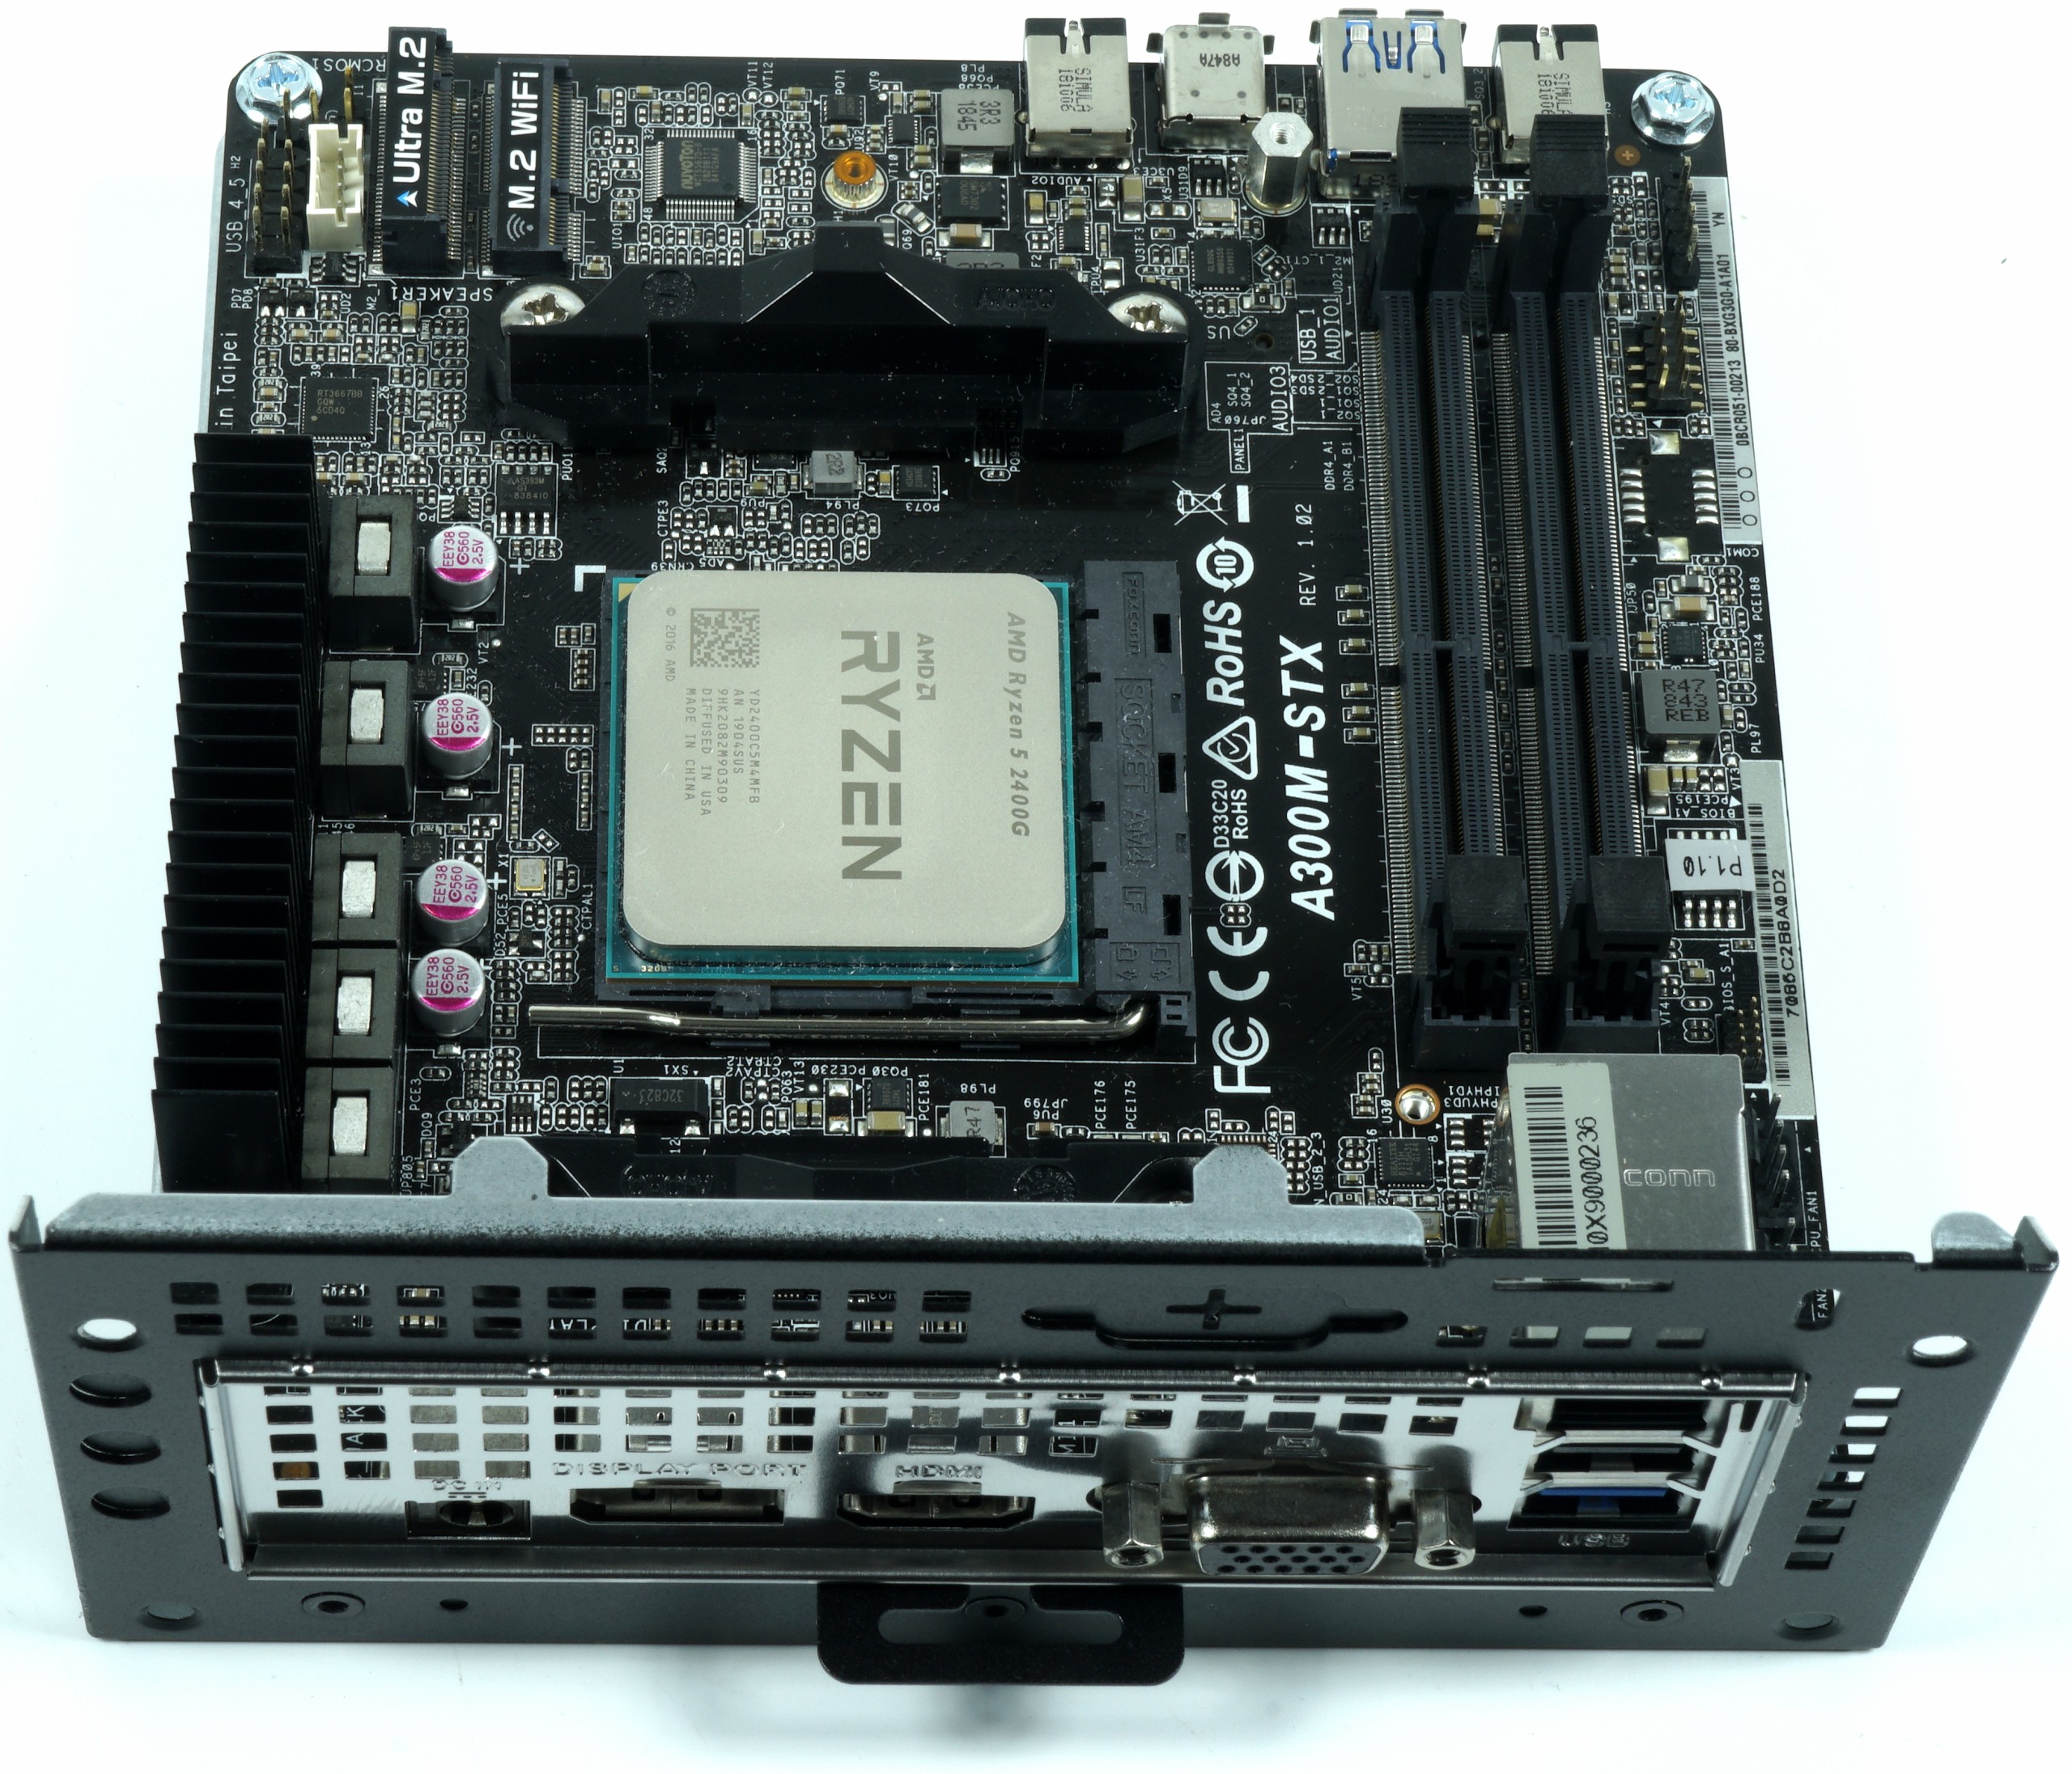 PC/タブレット デスクトップ型PC ASRock DeskMini A300 with the Ryzen 5 2400G APU from AMD in a 